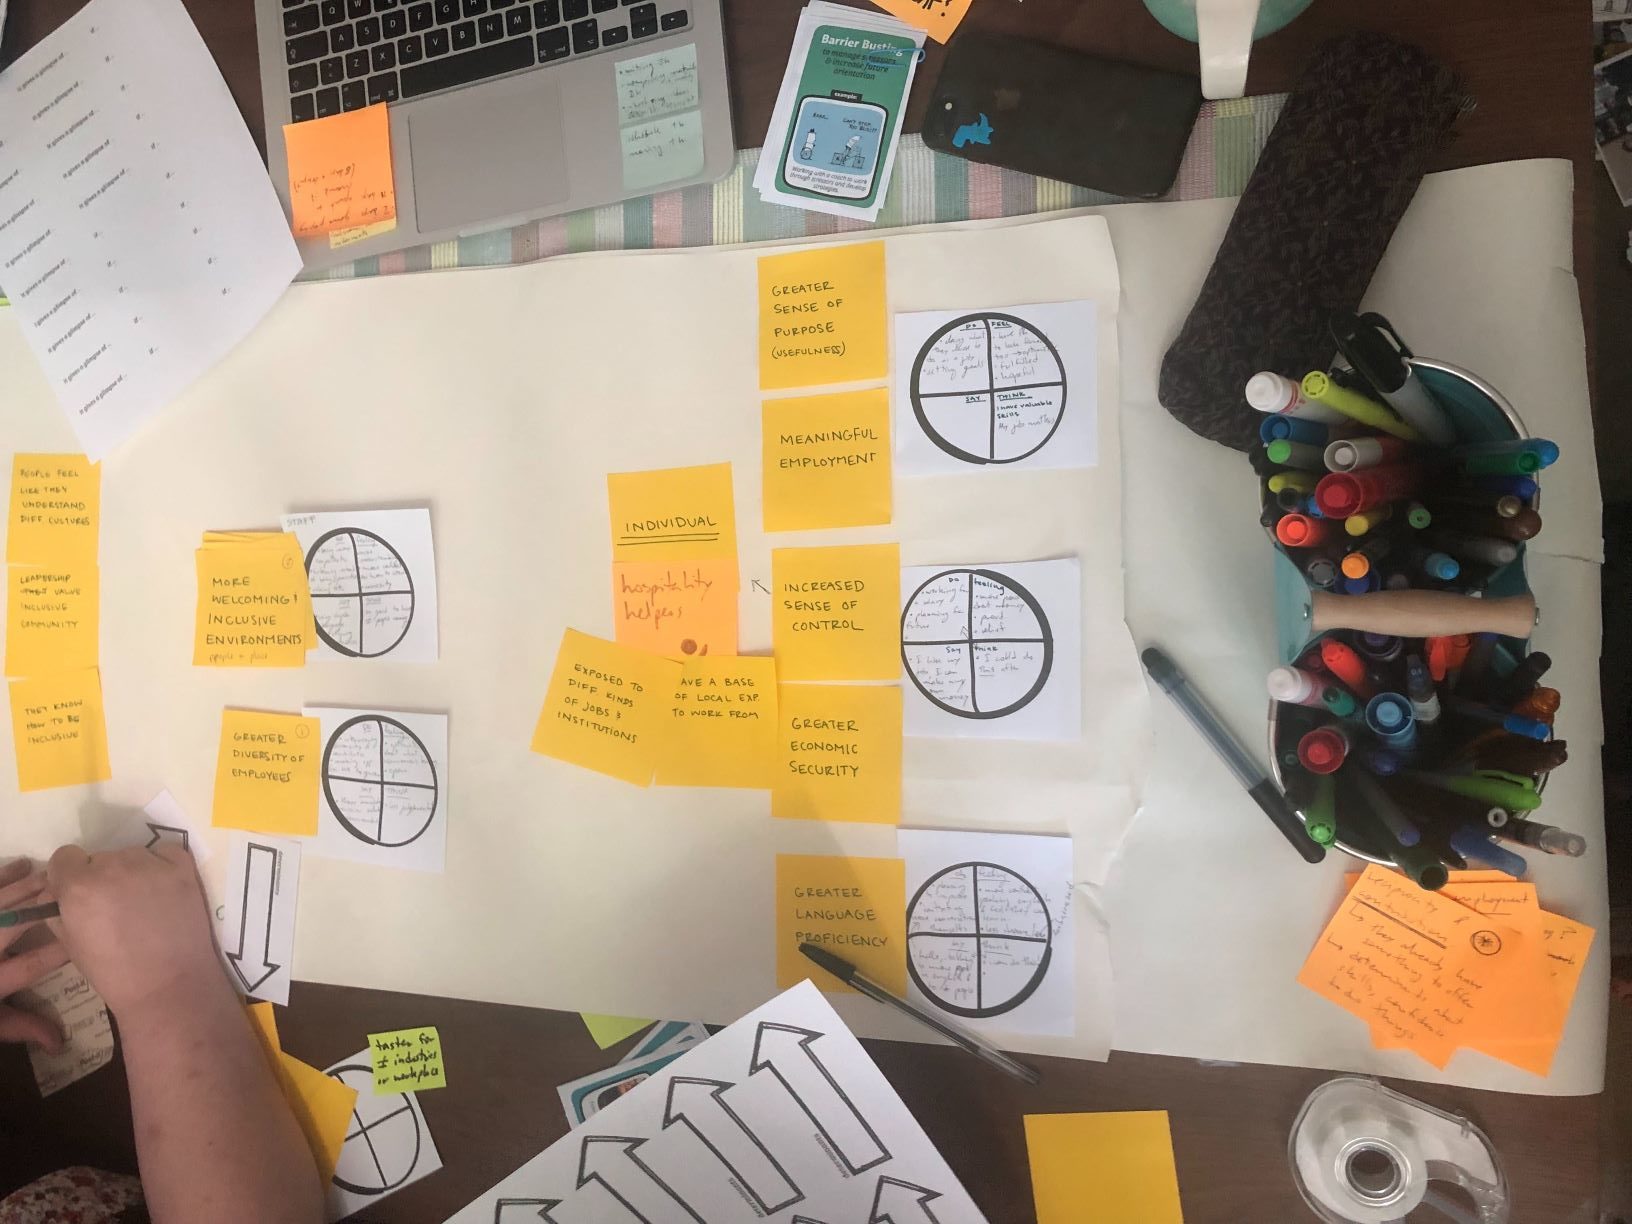 A large sheet of paper with yellow post-its that state desired outcomes beside circles broken into quadrants where each outcome is broken down into what people are thinking, saying, feeling, and doing when living out that outcome.